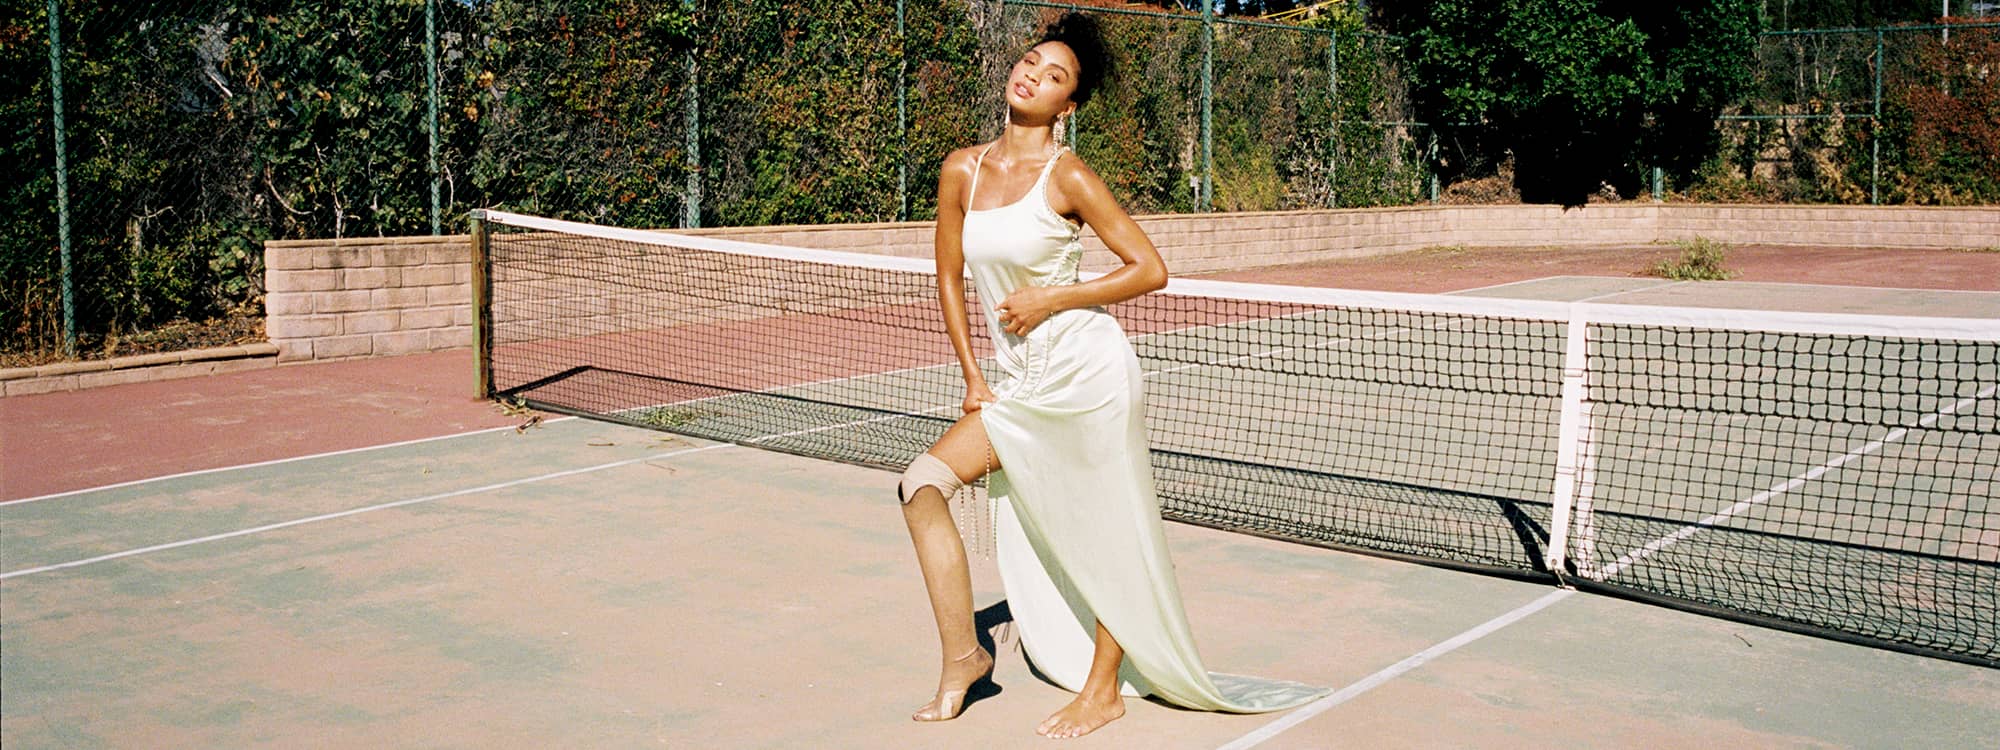 Model Lyric Mariah stands on a tennis court wearing a long silk green dress with her hand on her hip. Her hair is in an updo and her skin is gleaming in the sun. She is popping out her prosthetic leg.